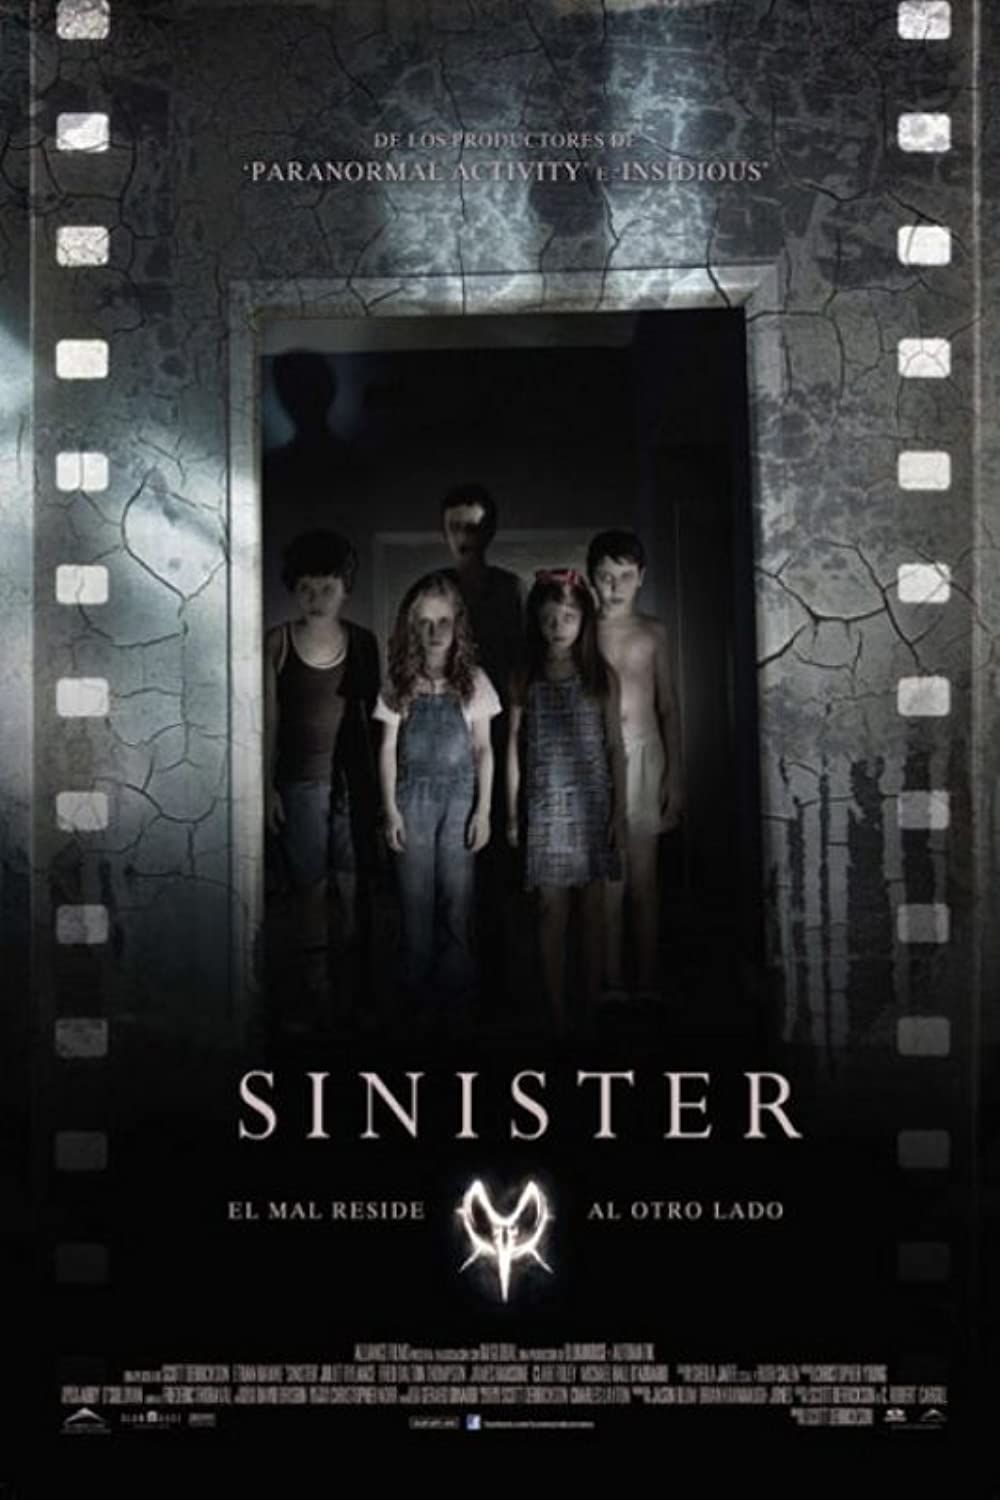 Sinister (2012) Hindi Dubbed BluRay download full movie